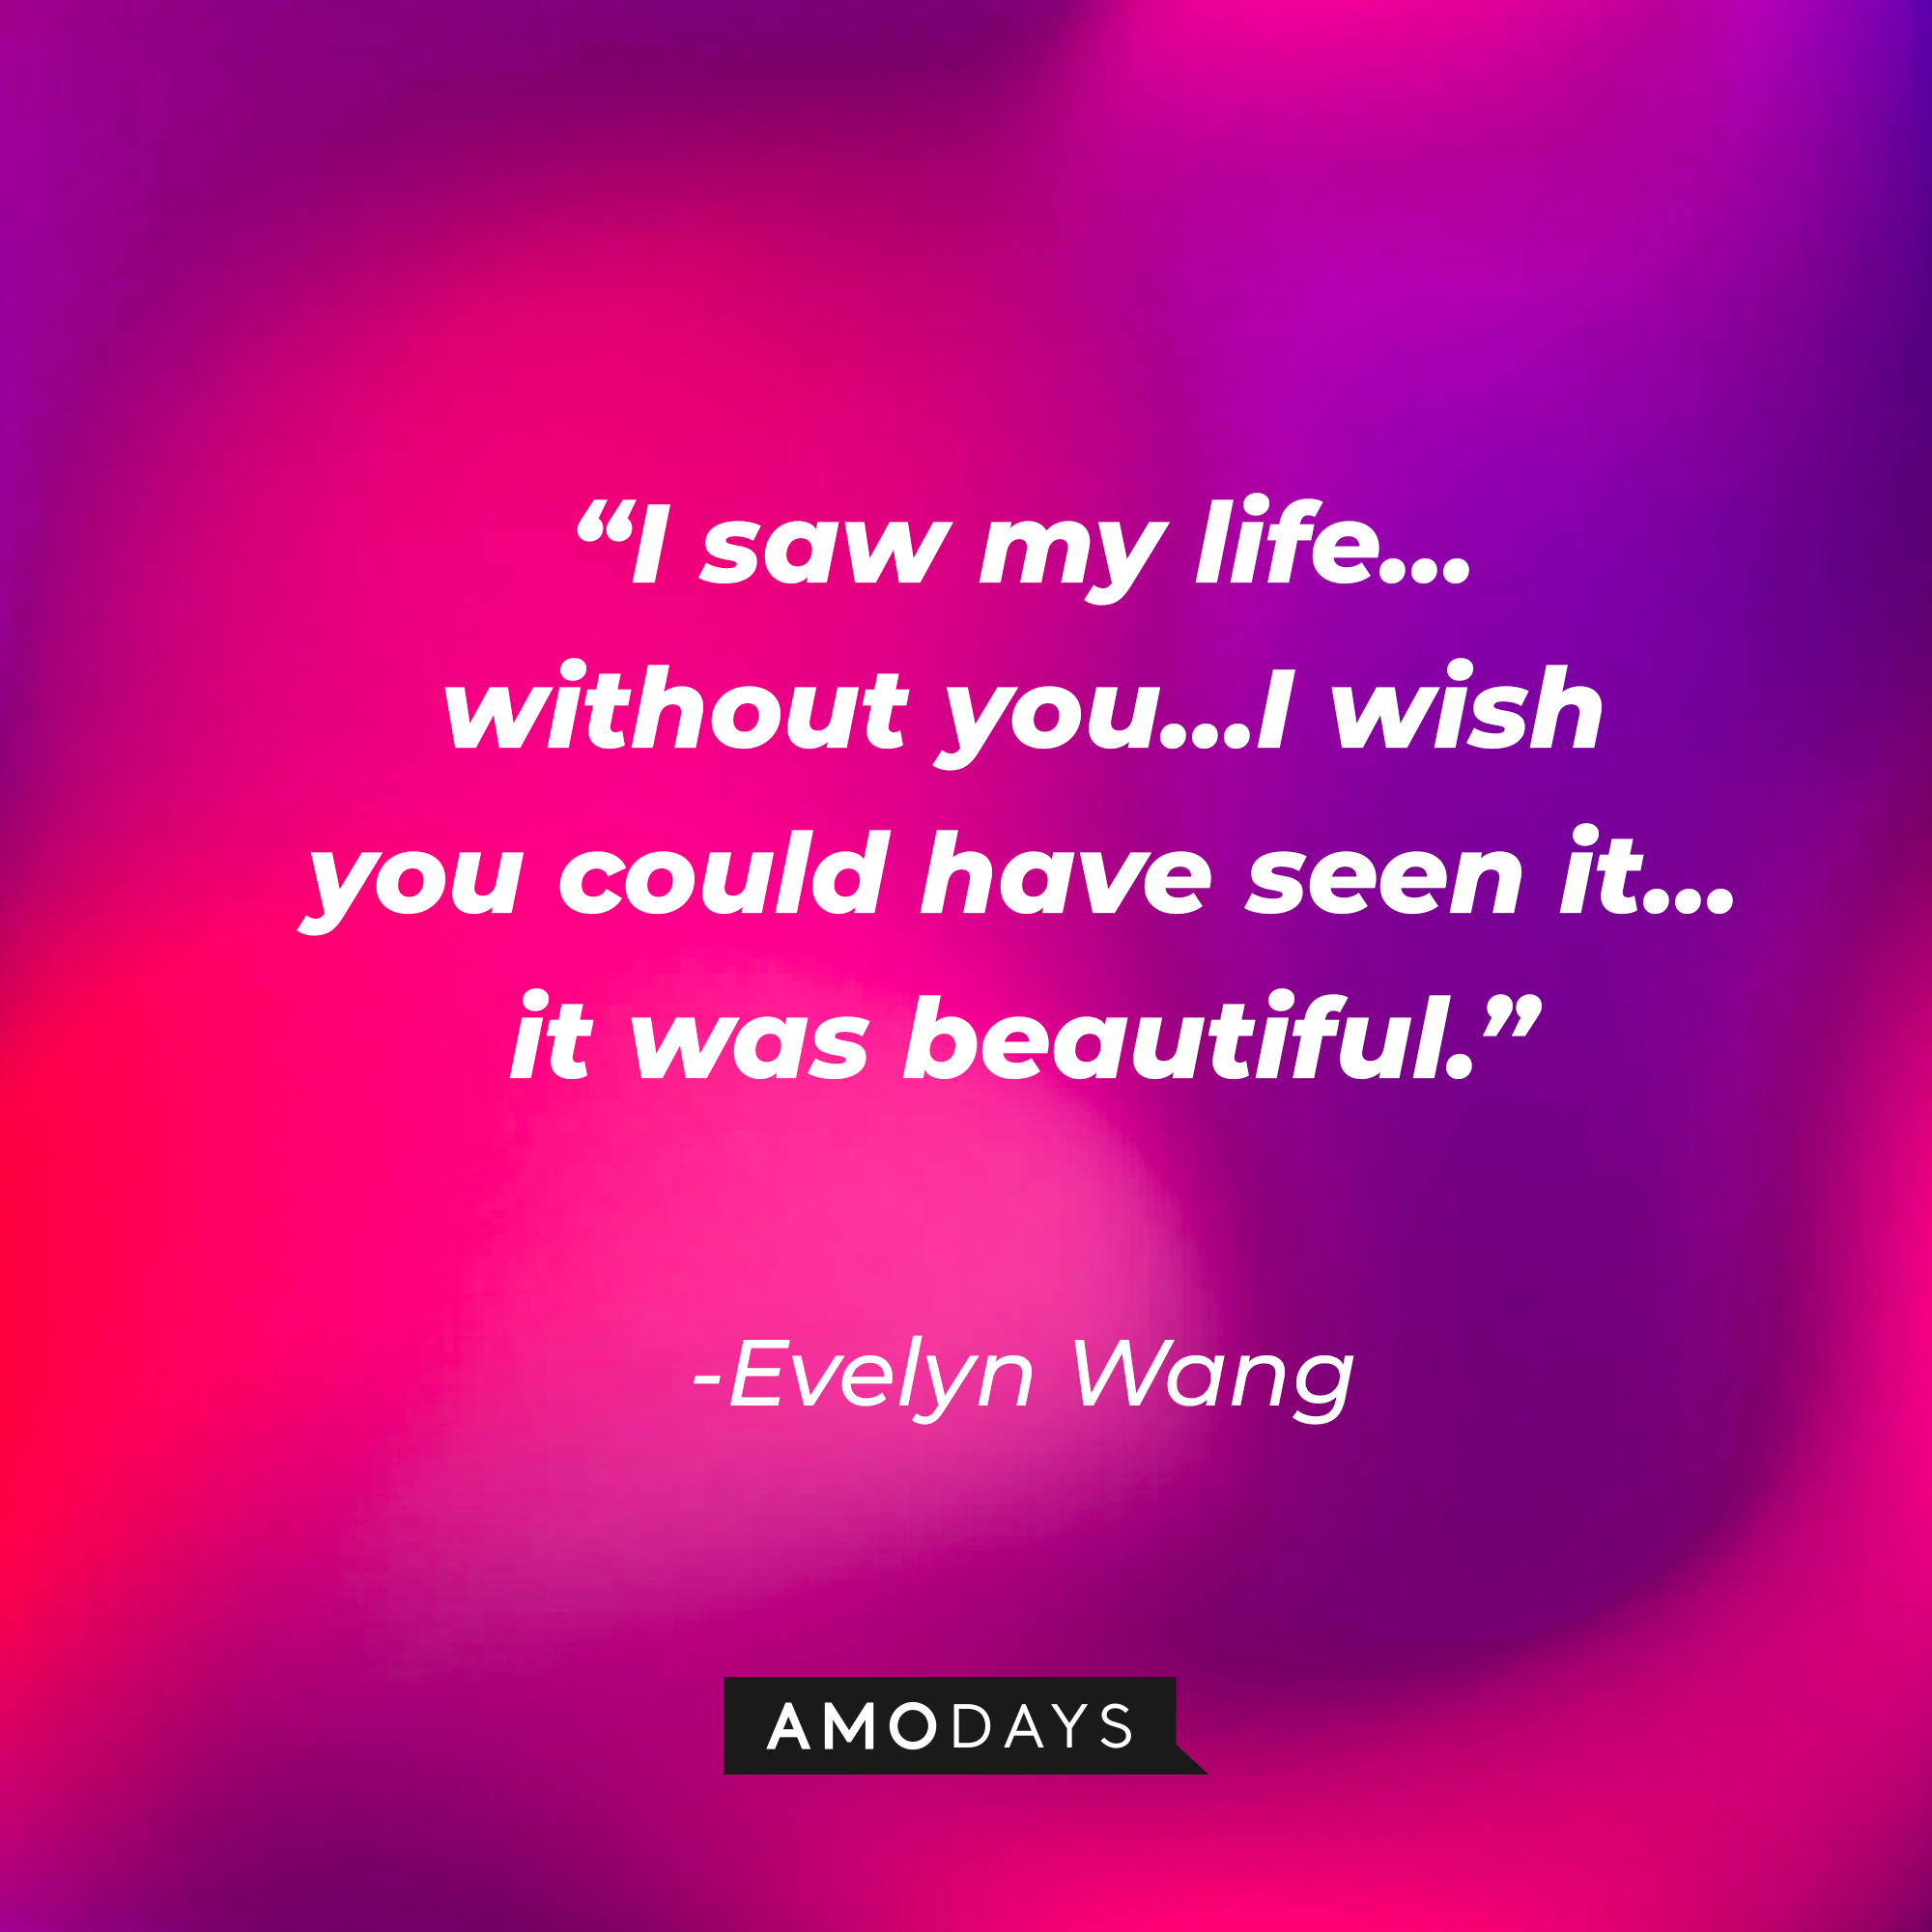 Evelyn Wang’s quote: “I saw my life…without you…I wish you could have seen it…it was beautiful.” |  Source: AmoDays